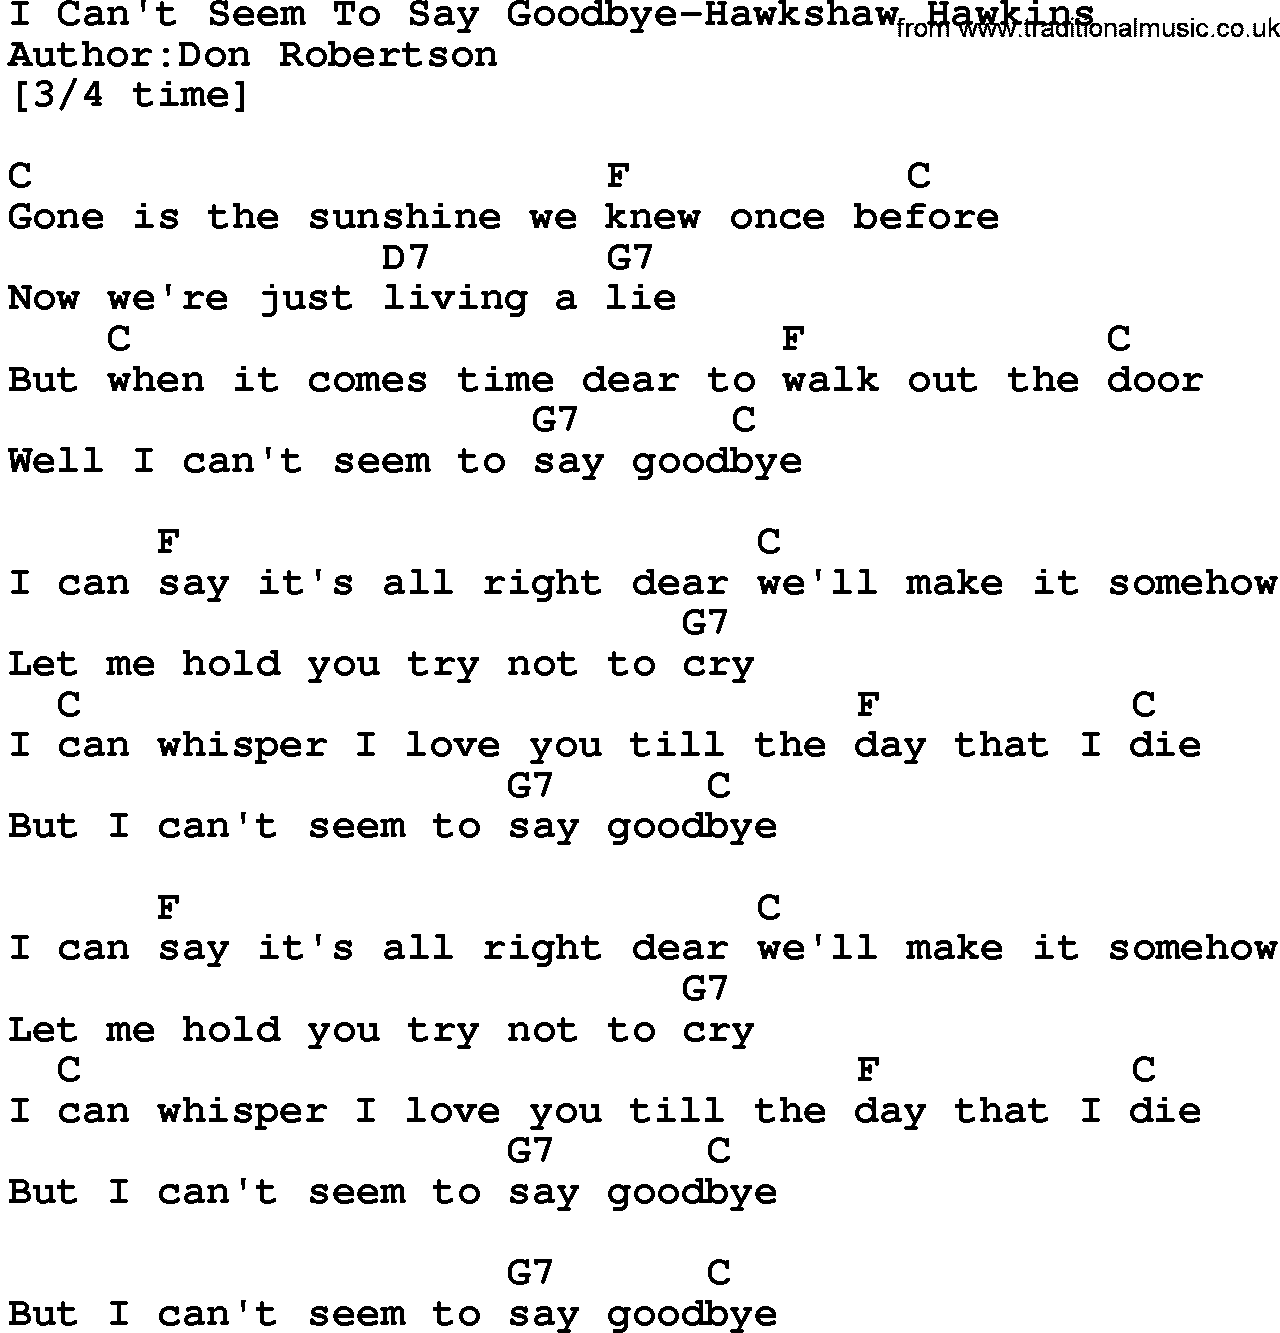 Country music song: I Can't Seem To Say Goodbye-Hawkshaw Hawkins lyrics and chords